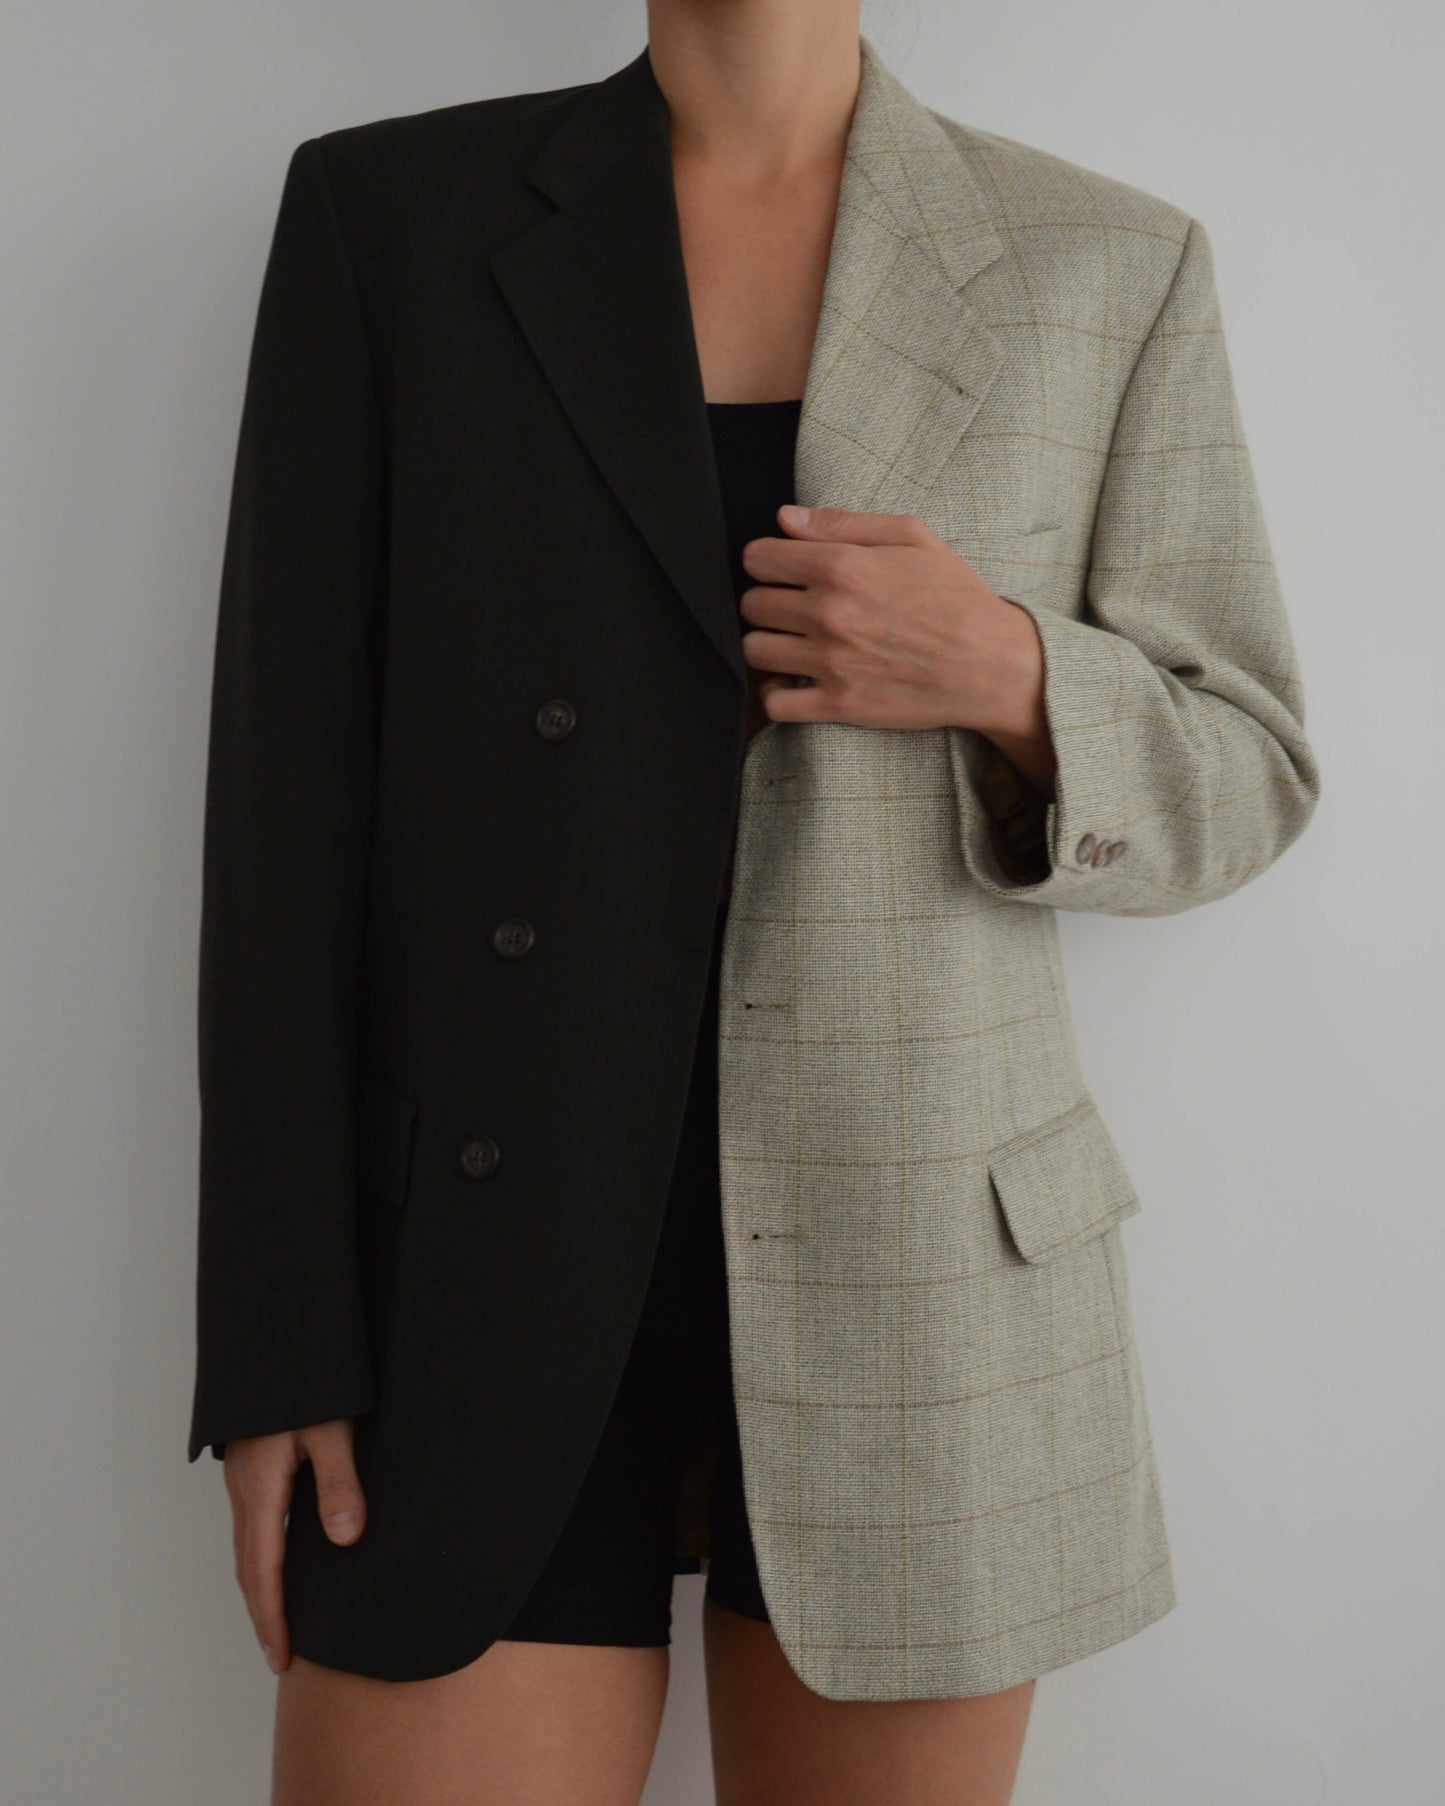 DUO Blazer - Beige and Olive (S/L)